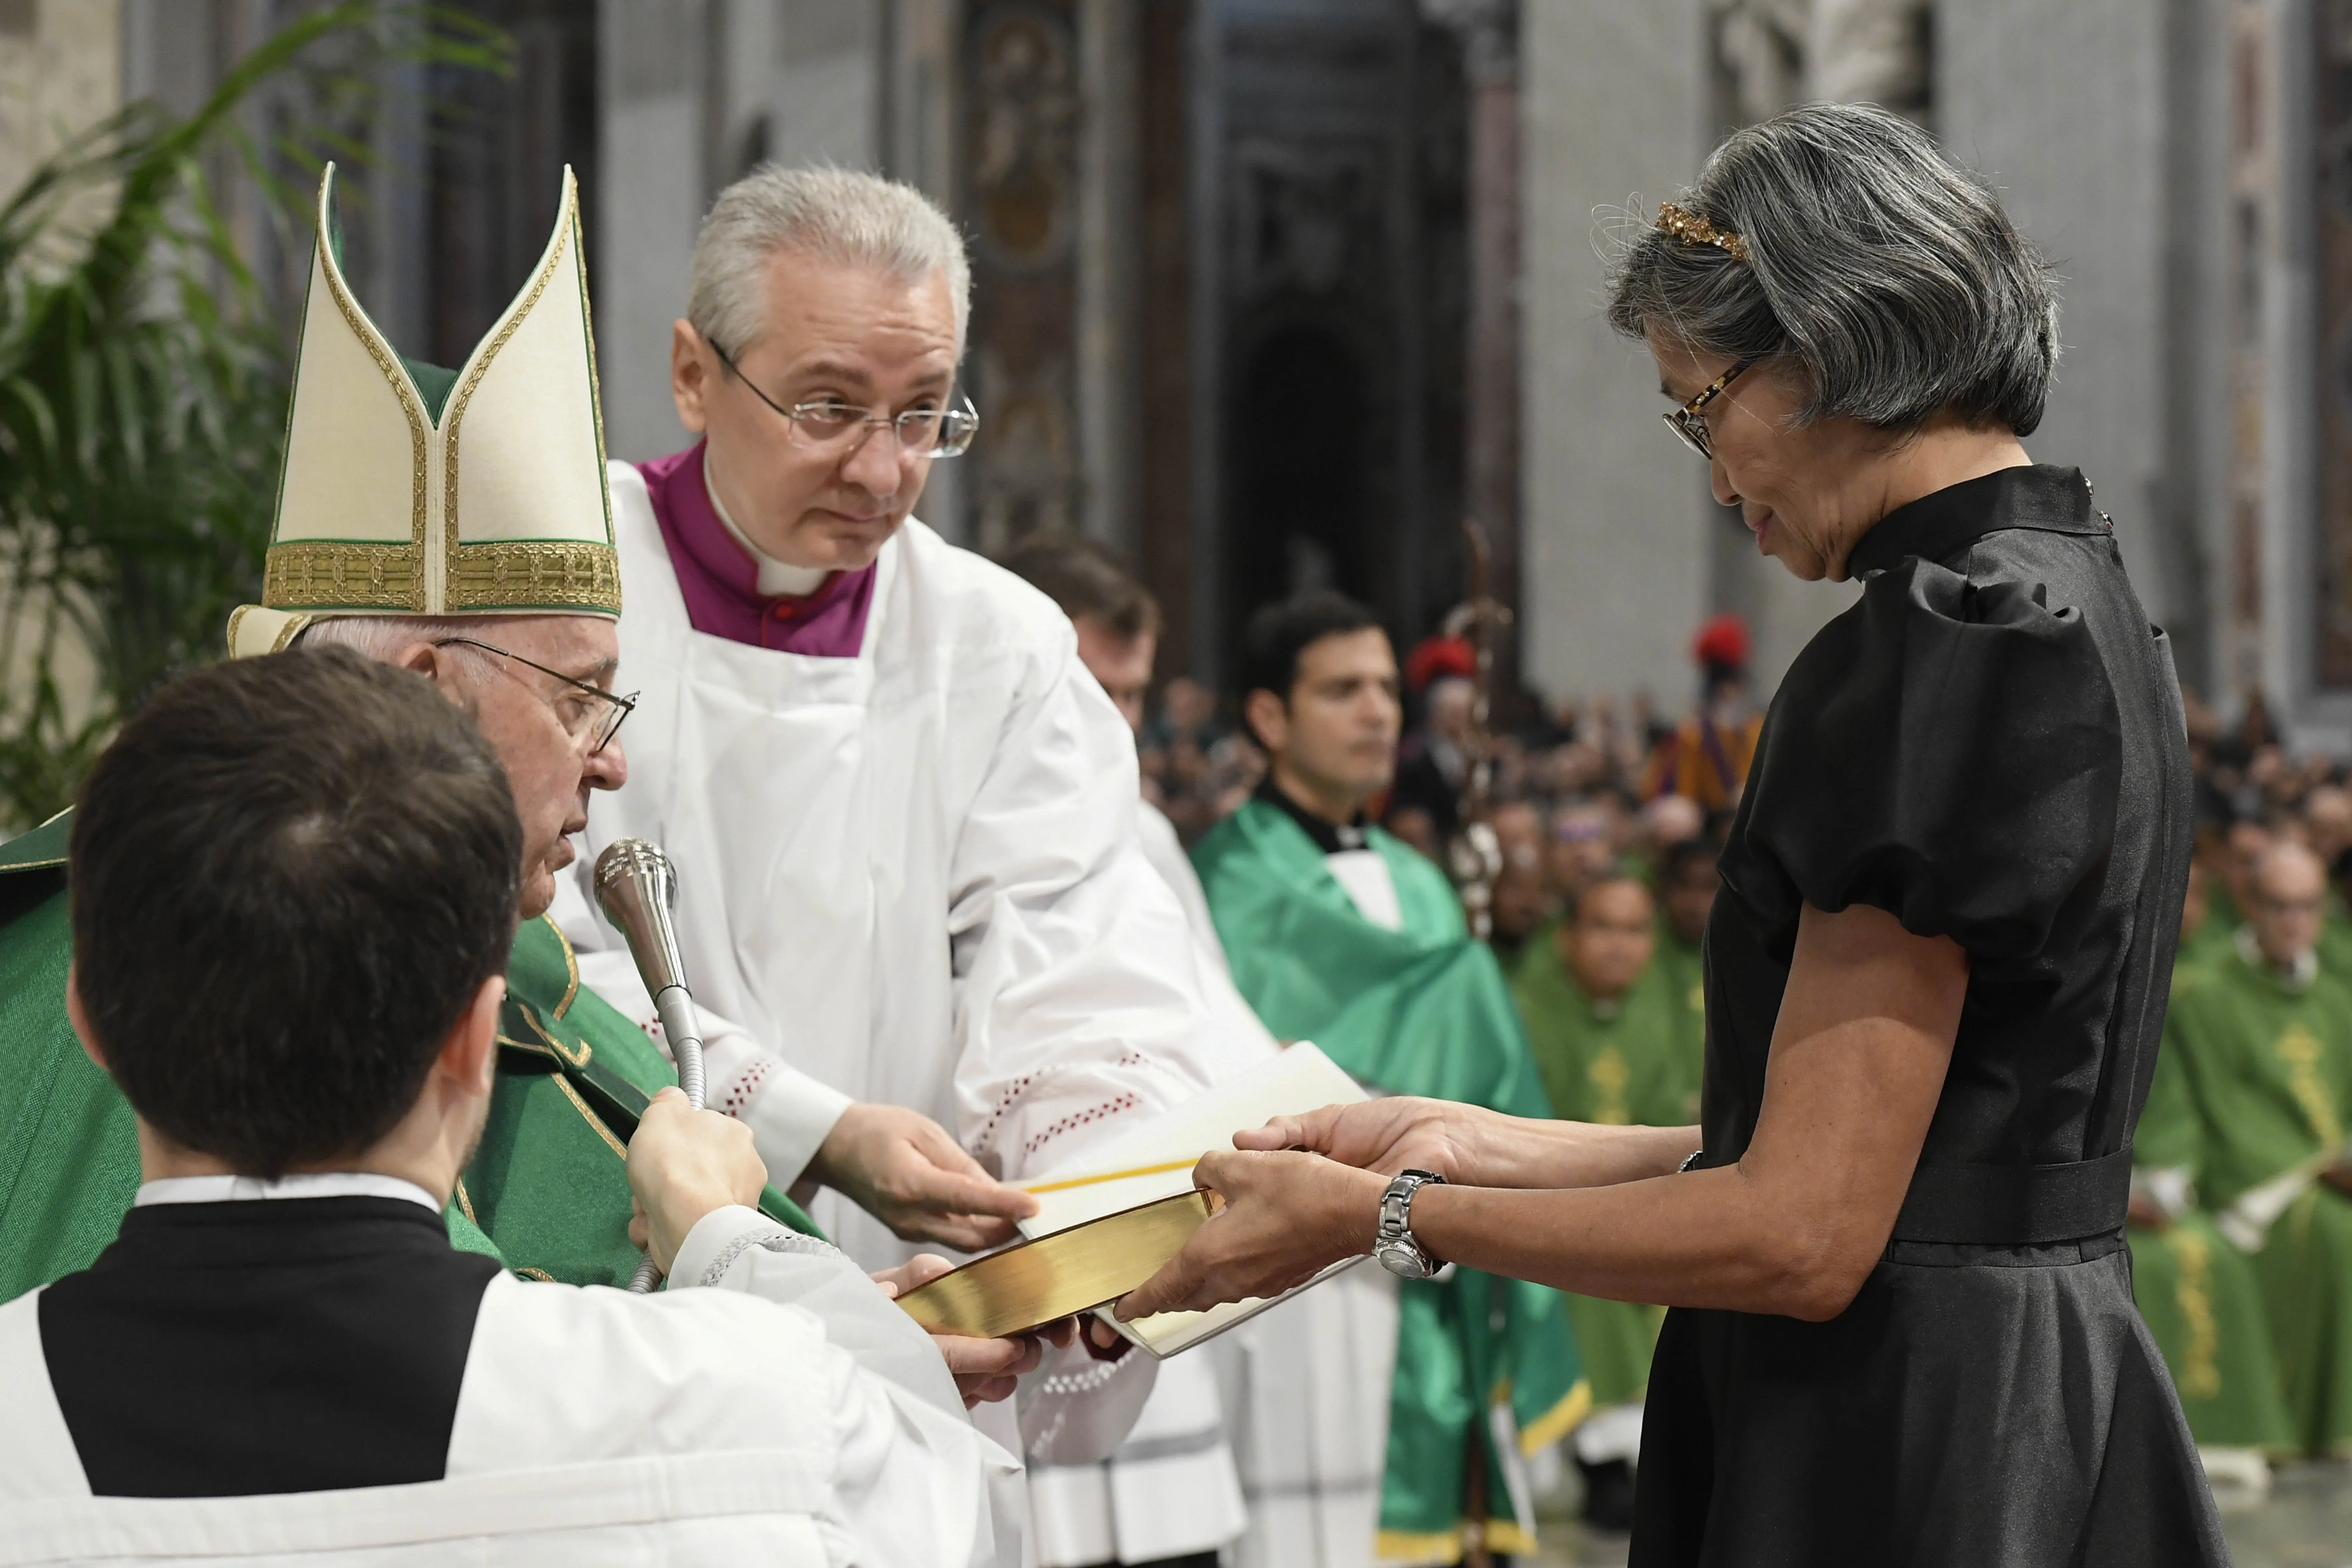 Pope Francis formally confers the ministry of lector upon a woman on Jan. 22, 2023. Vatican Media